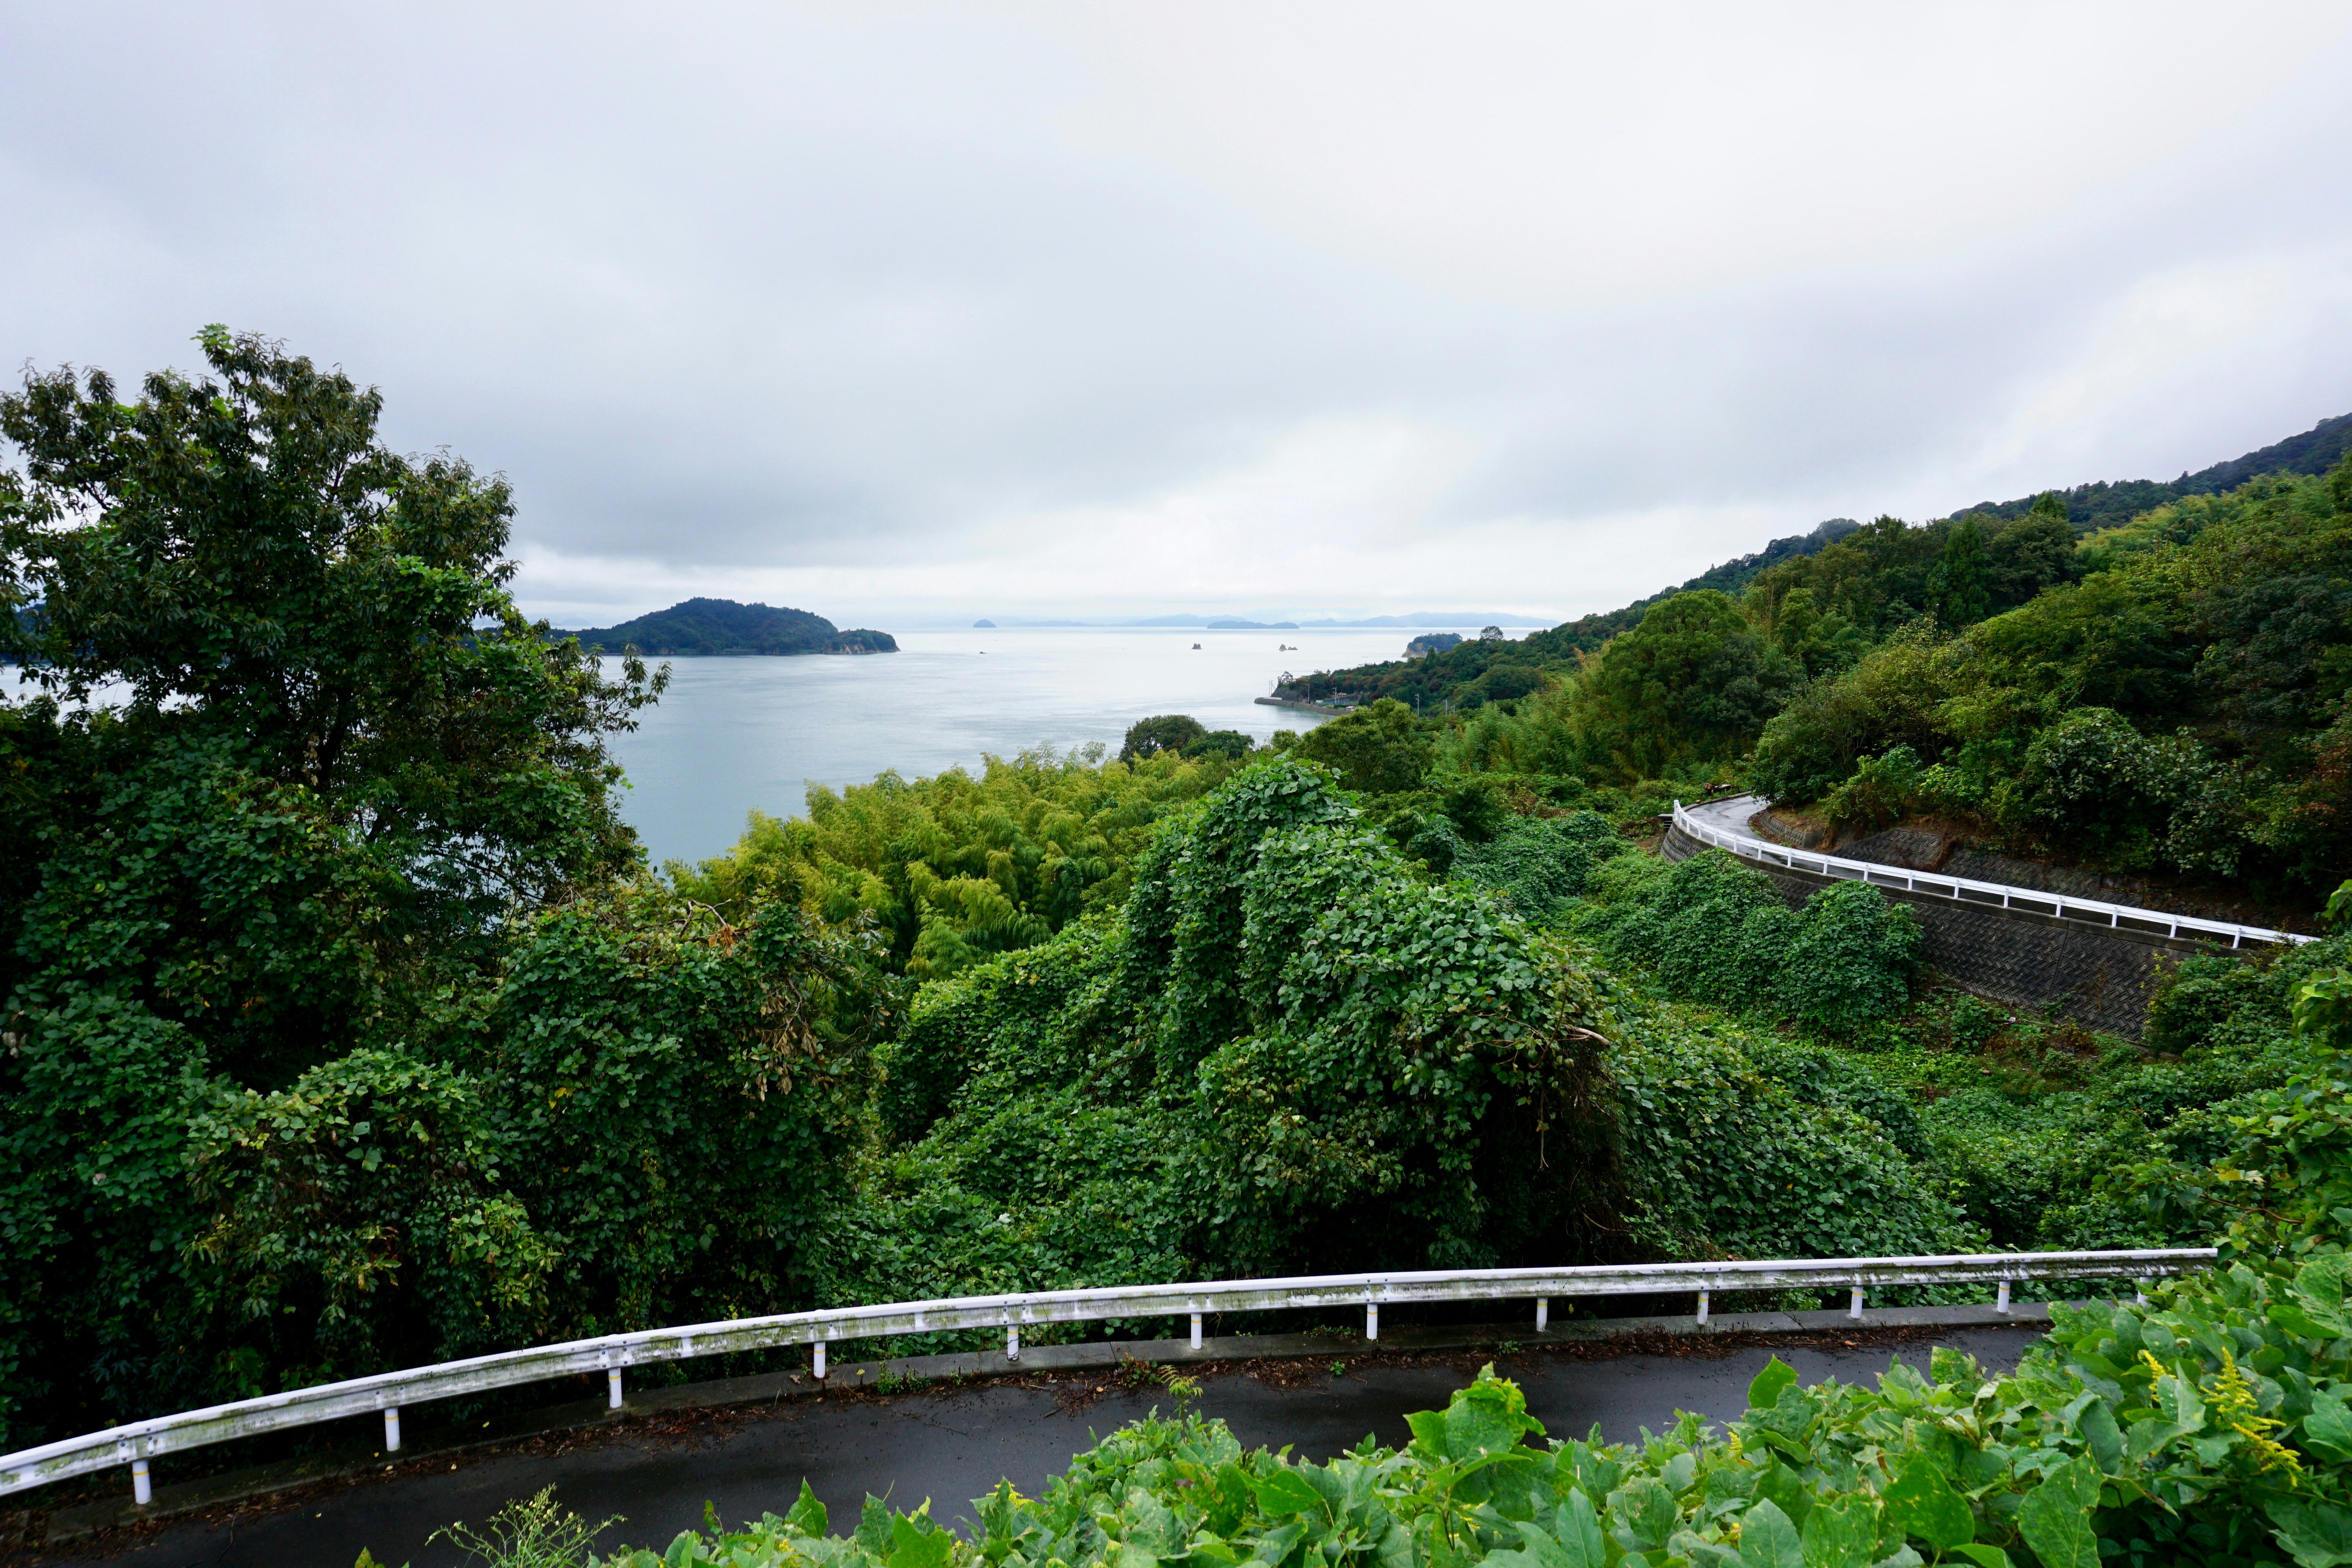 Lush, bright green and variegated trees and vines coat the hillsides around the Tobashima Kaido. The ribbon of black roads and white guardrails twisting and turning with a silvery Seto Inland Sea and blue mountain islands in the left background of the shot.